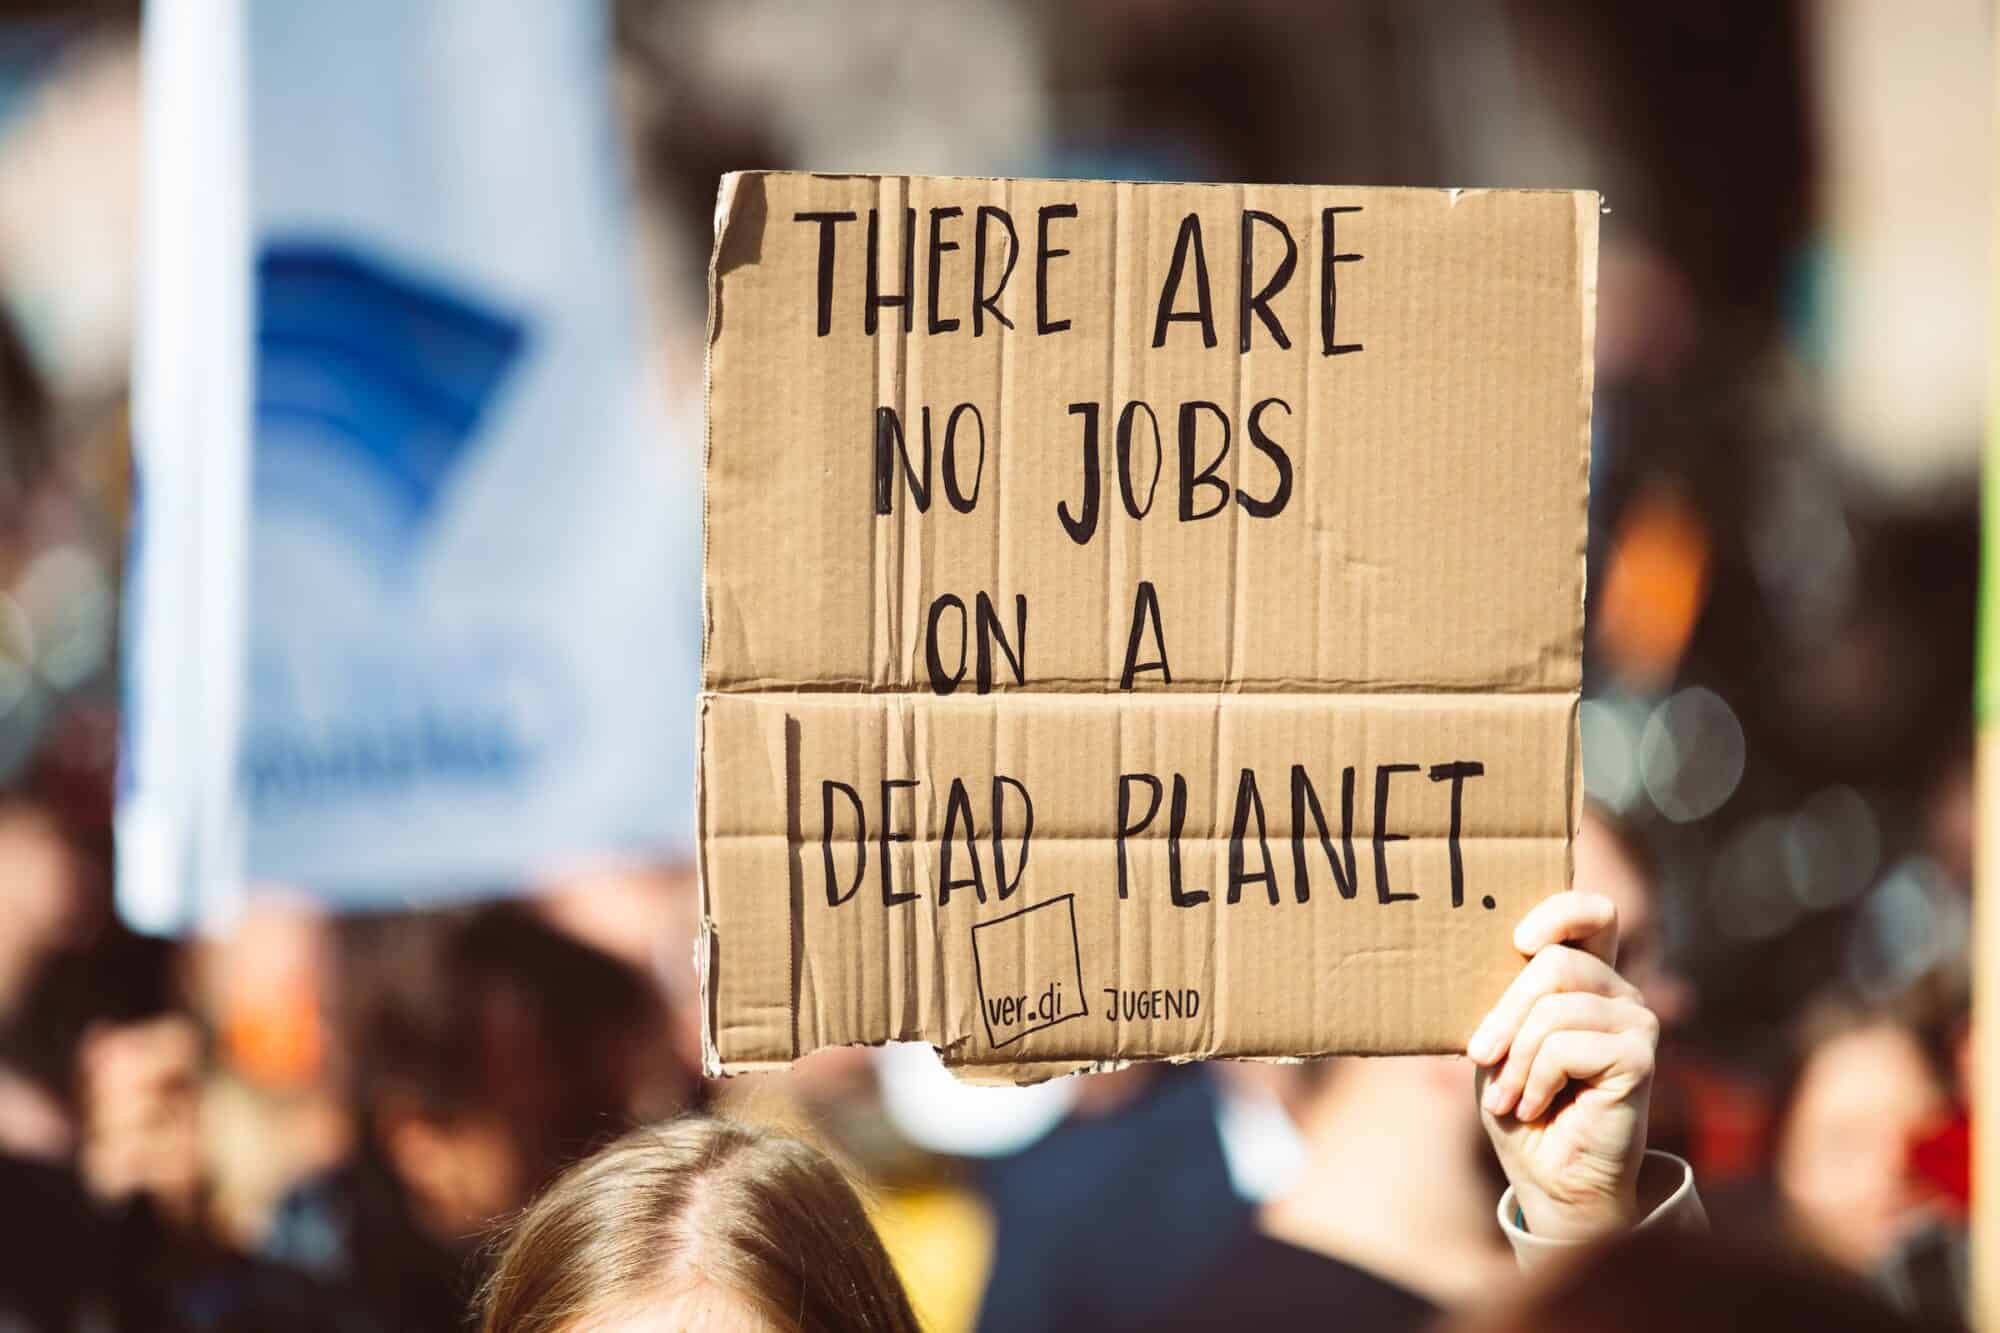 A climate protestor holds up a cardboard sign that says "There are no jobs on a dead planet."